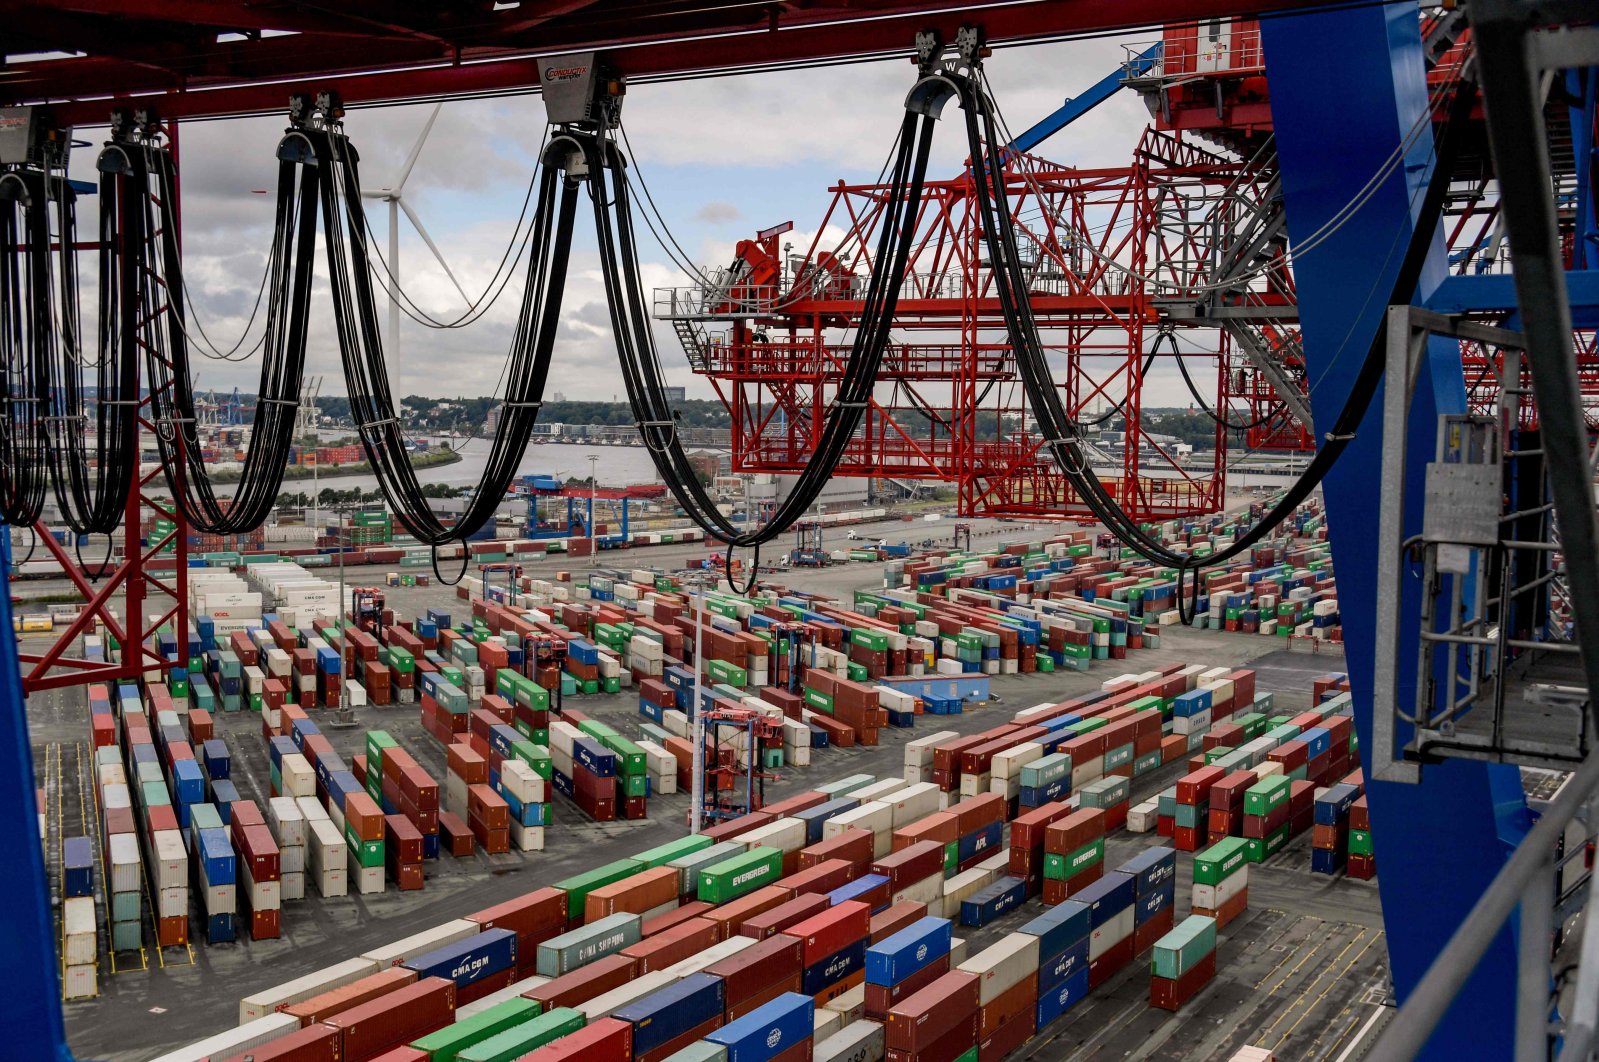 Containers are seen at the terminal of a port in Hamburg, northern Germany, July 10, 2018. (AFP Photo)